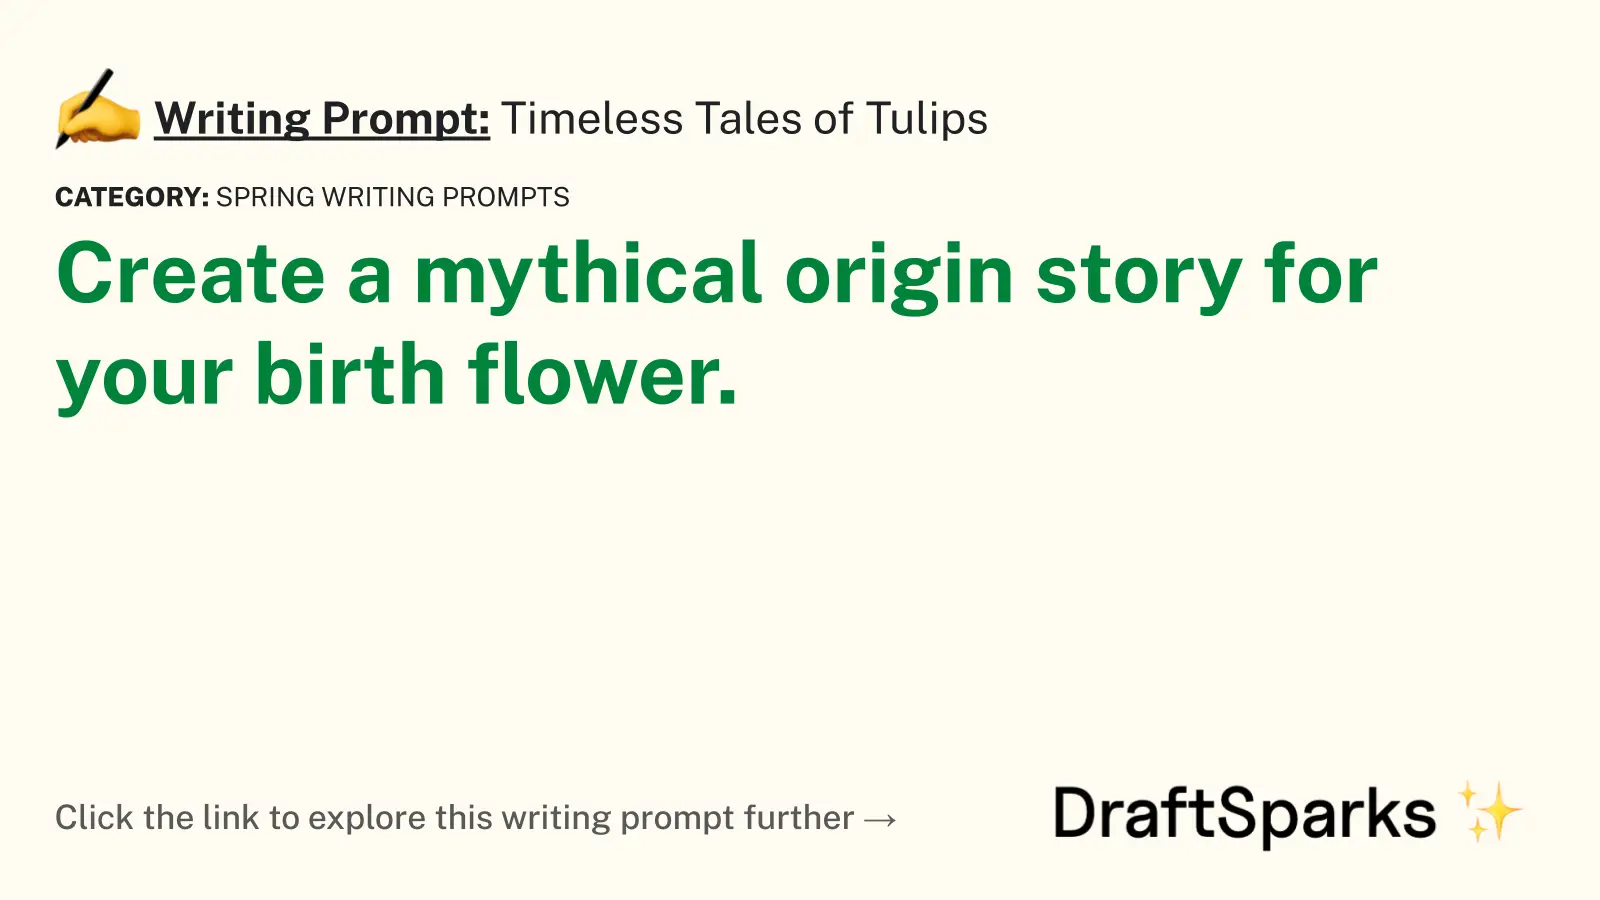 Timeless Tales of Tulips